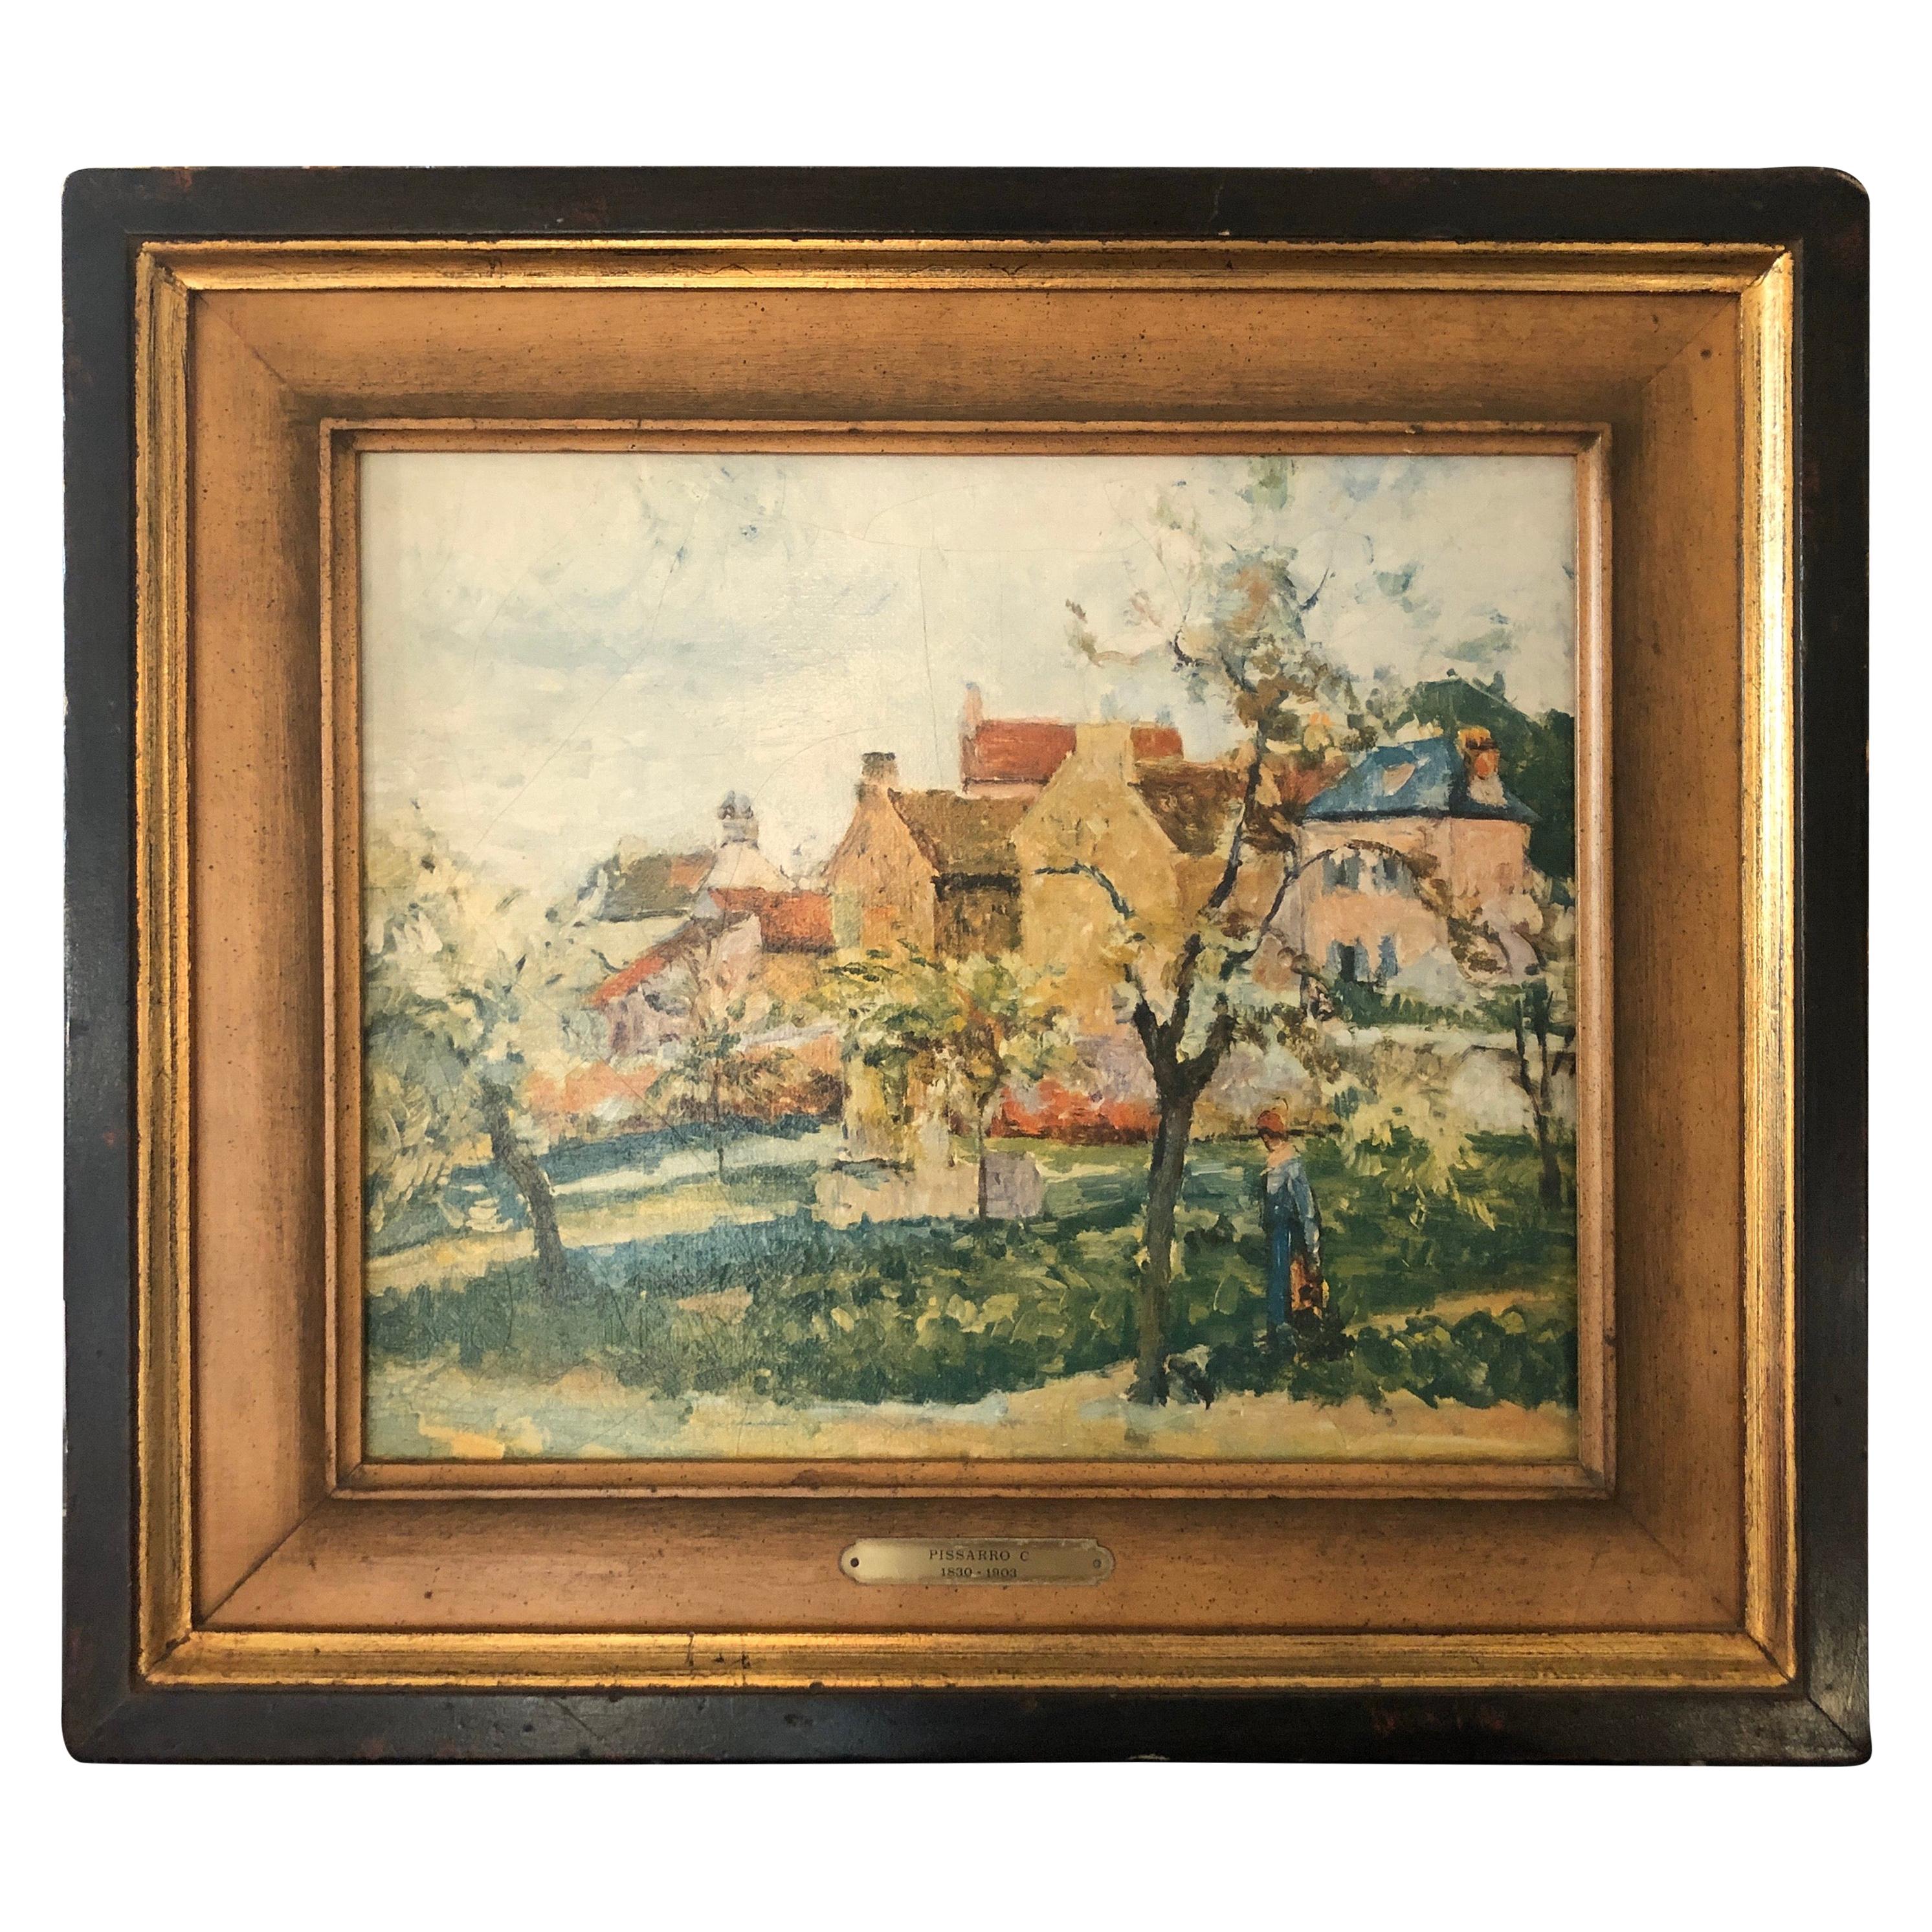 Oil Painting on Canvas Hand Painted Reproduction of Pissarro's Painting